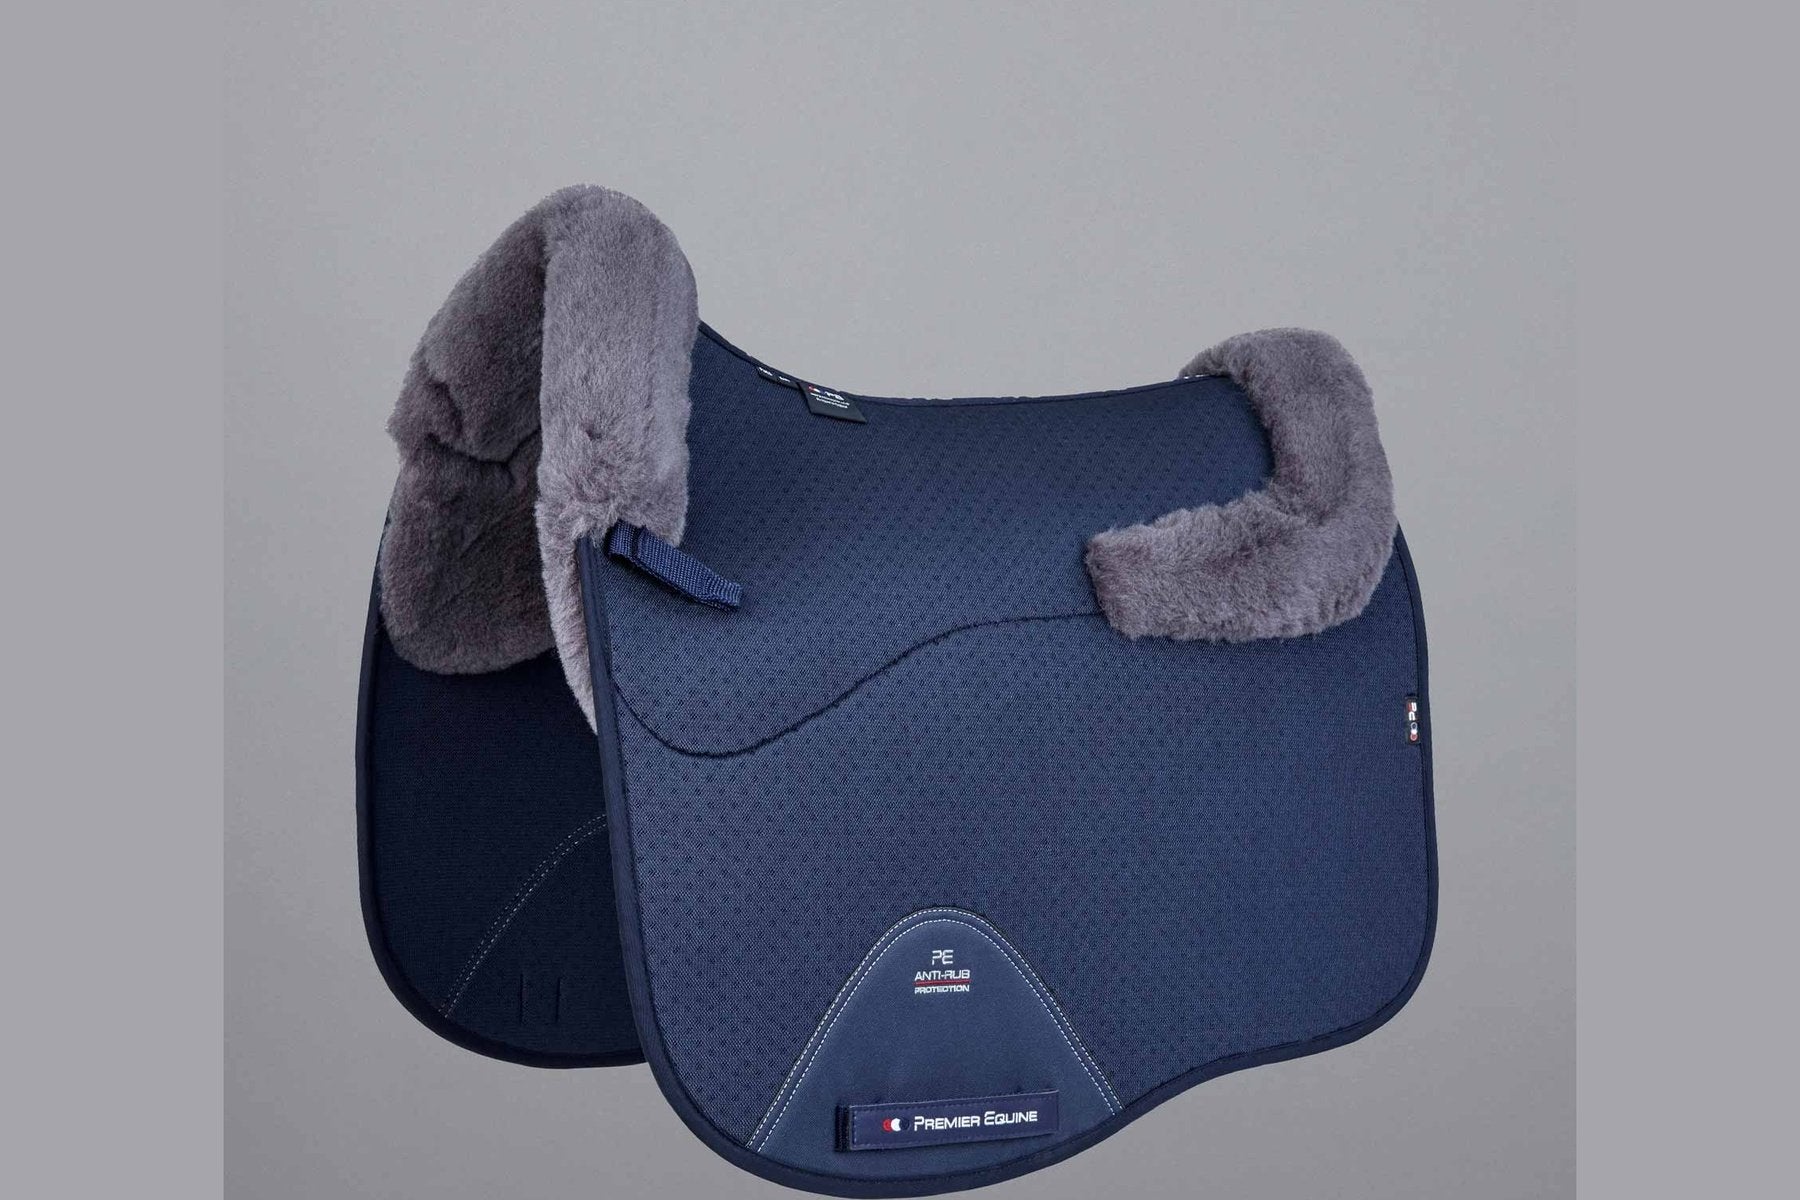 Description:Close Contact Airtechnology Shockproof Wool Saddle Pad - Dressage Square_Colour:Navy/Grey Wool_Position:1